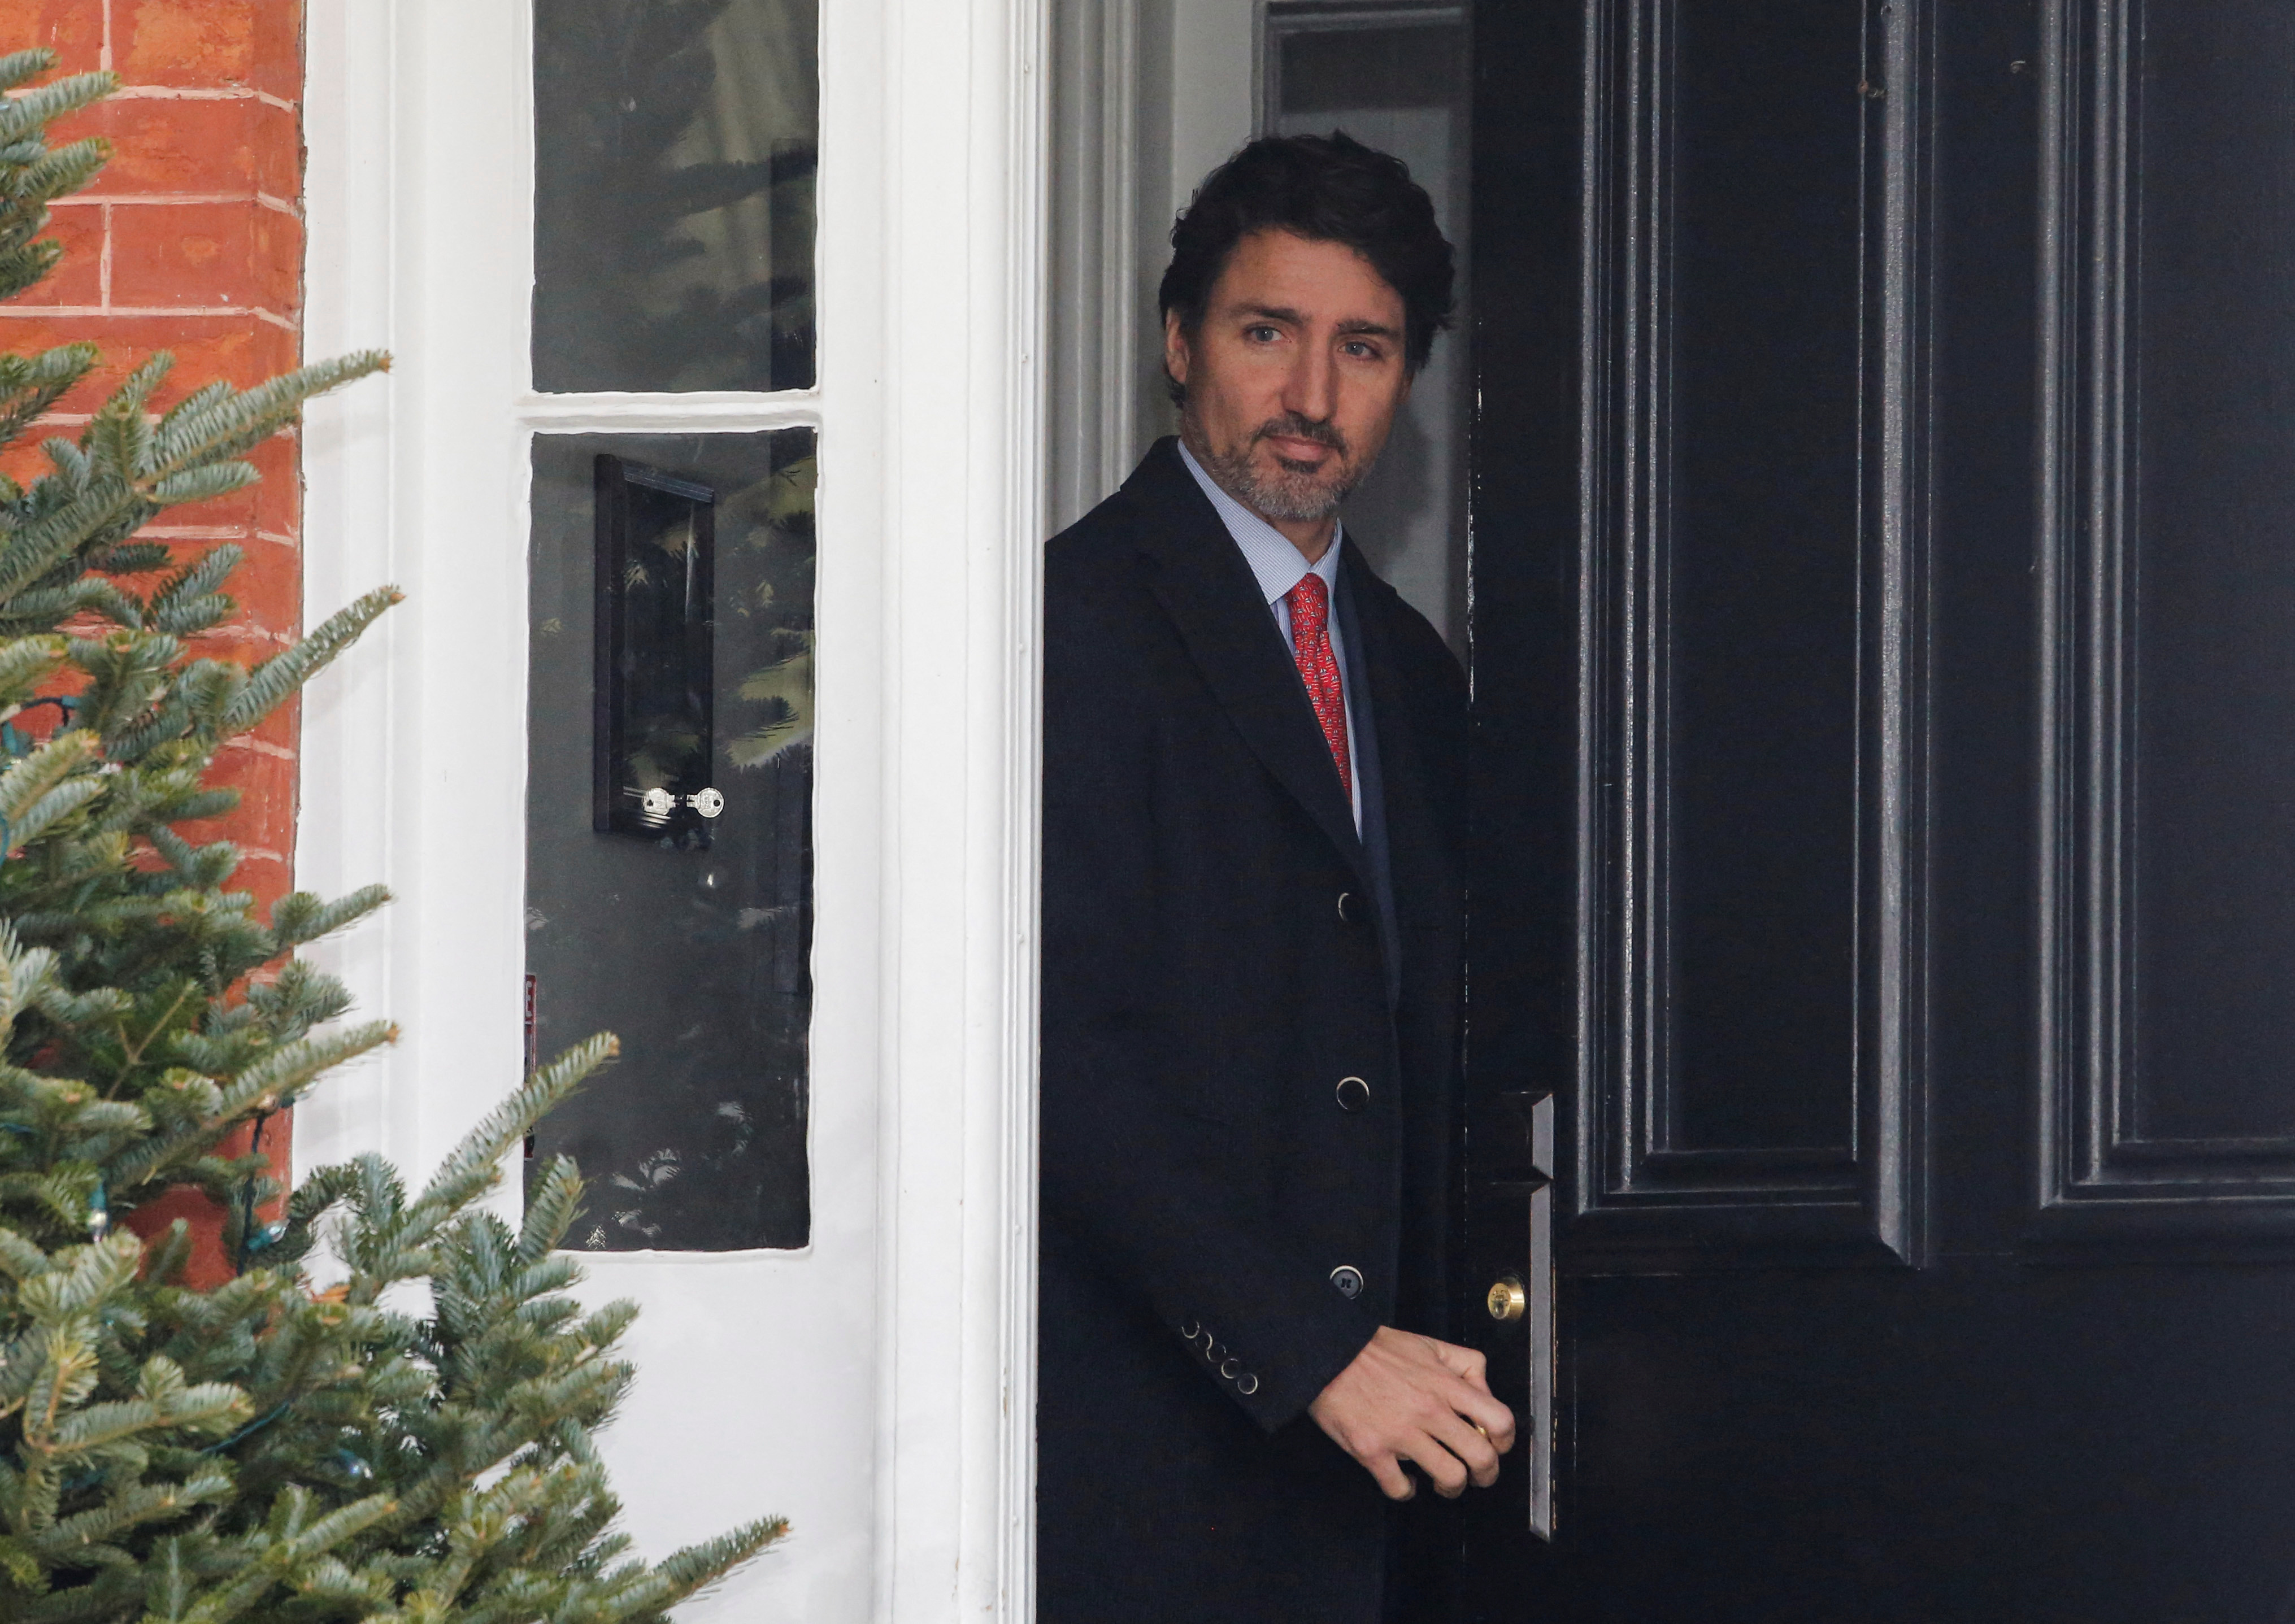 Canada's Prime Minister Justin Trudeau arrives to speak to news media outside his home in Ottawa